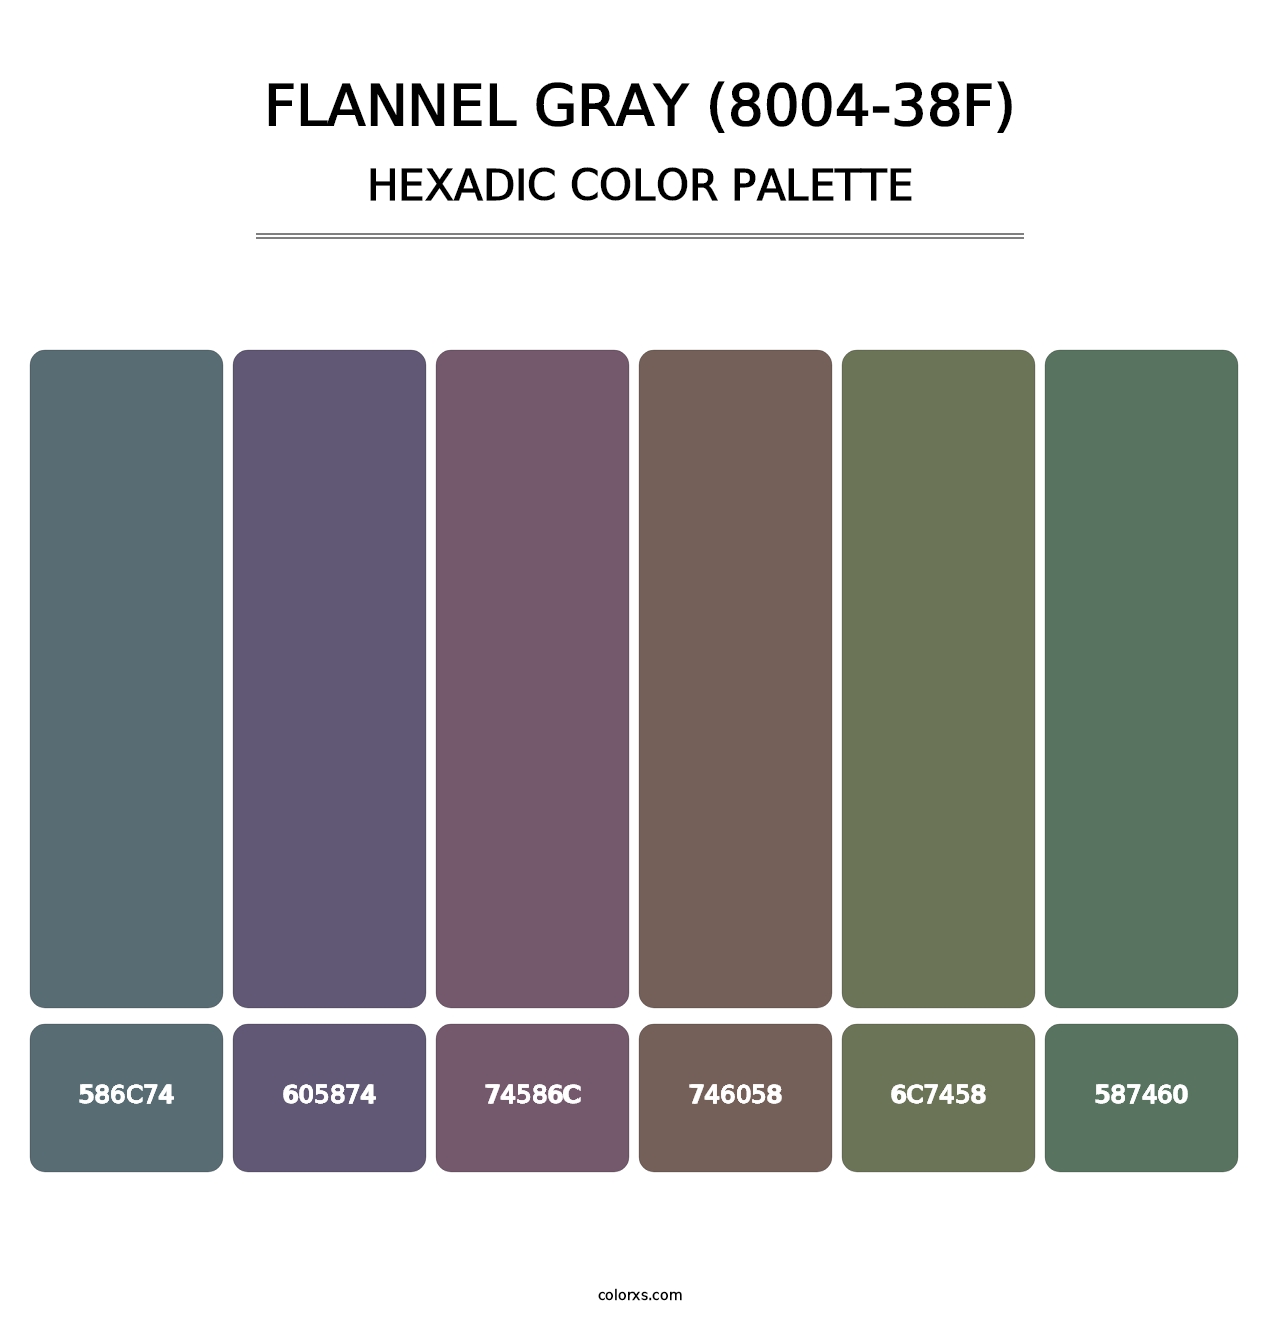 Flannel Gray (8004-38F) - Hexadic Color Palette